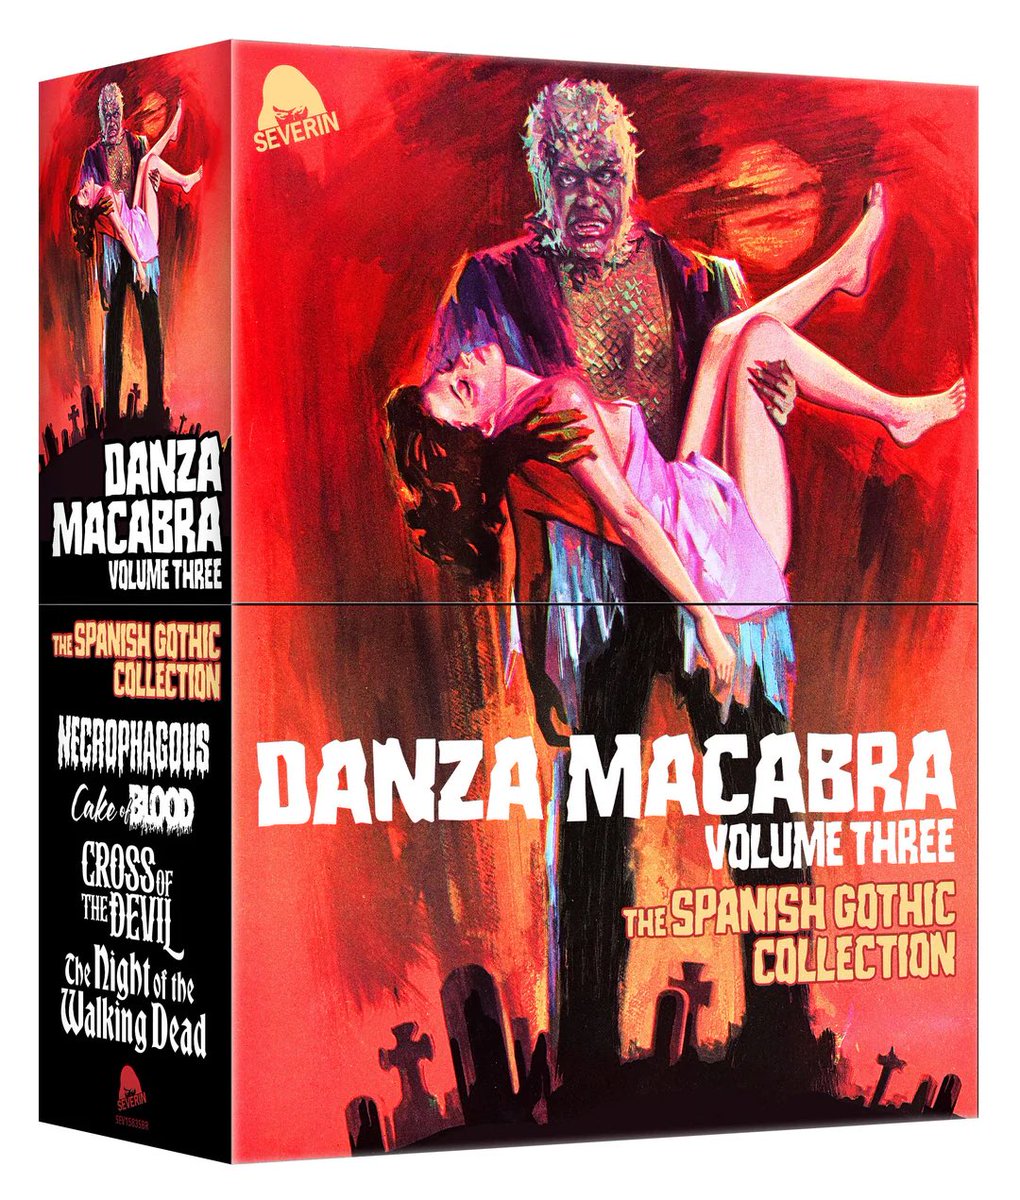 Do you too feel like you spend 10% of your annual income on #physicalmedia?  ⁦@SeverinFilms⁩ Clones of Bruce and Danza Macabra volume three are going to push me to spend 15% this year.